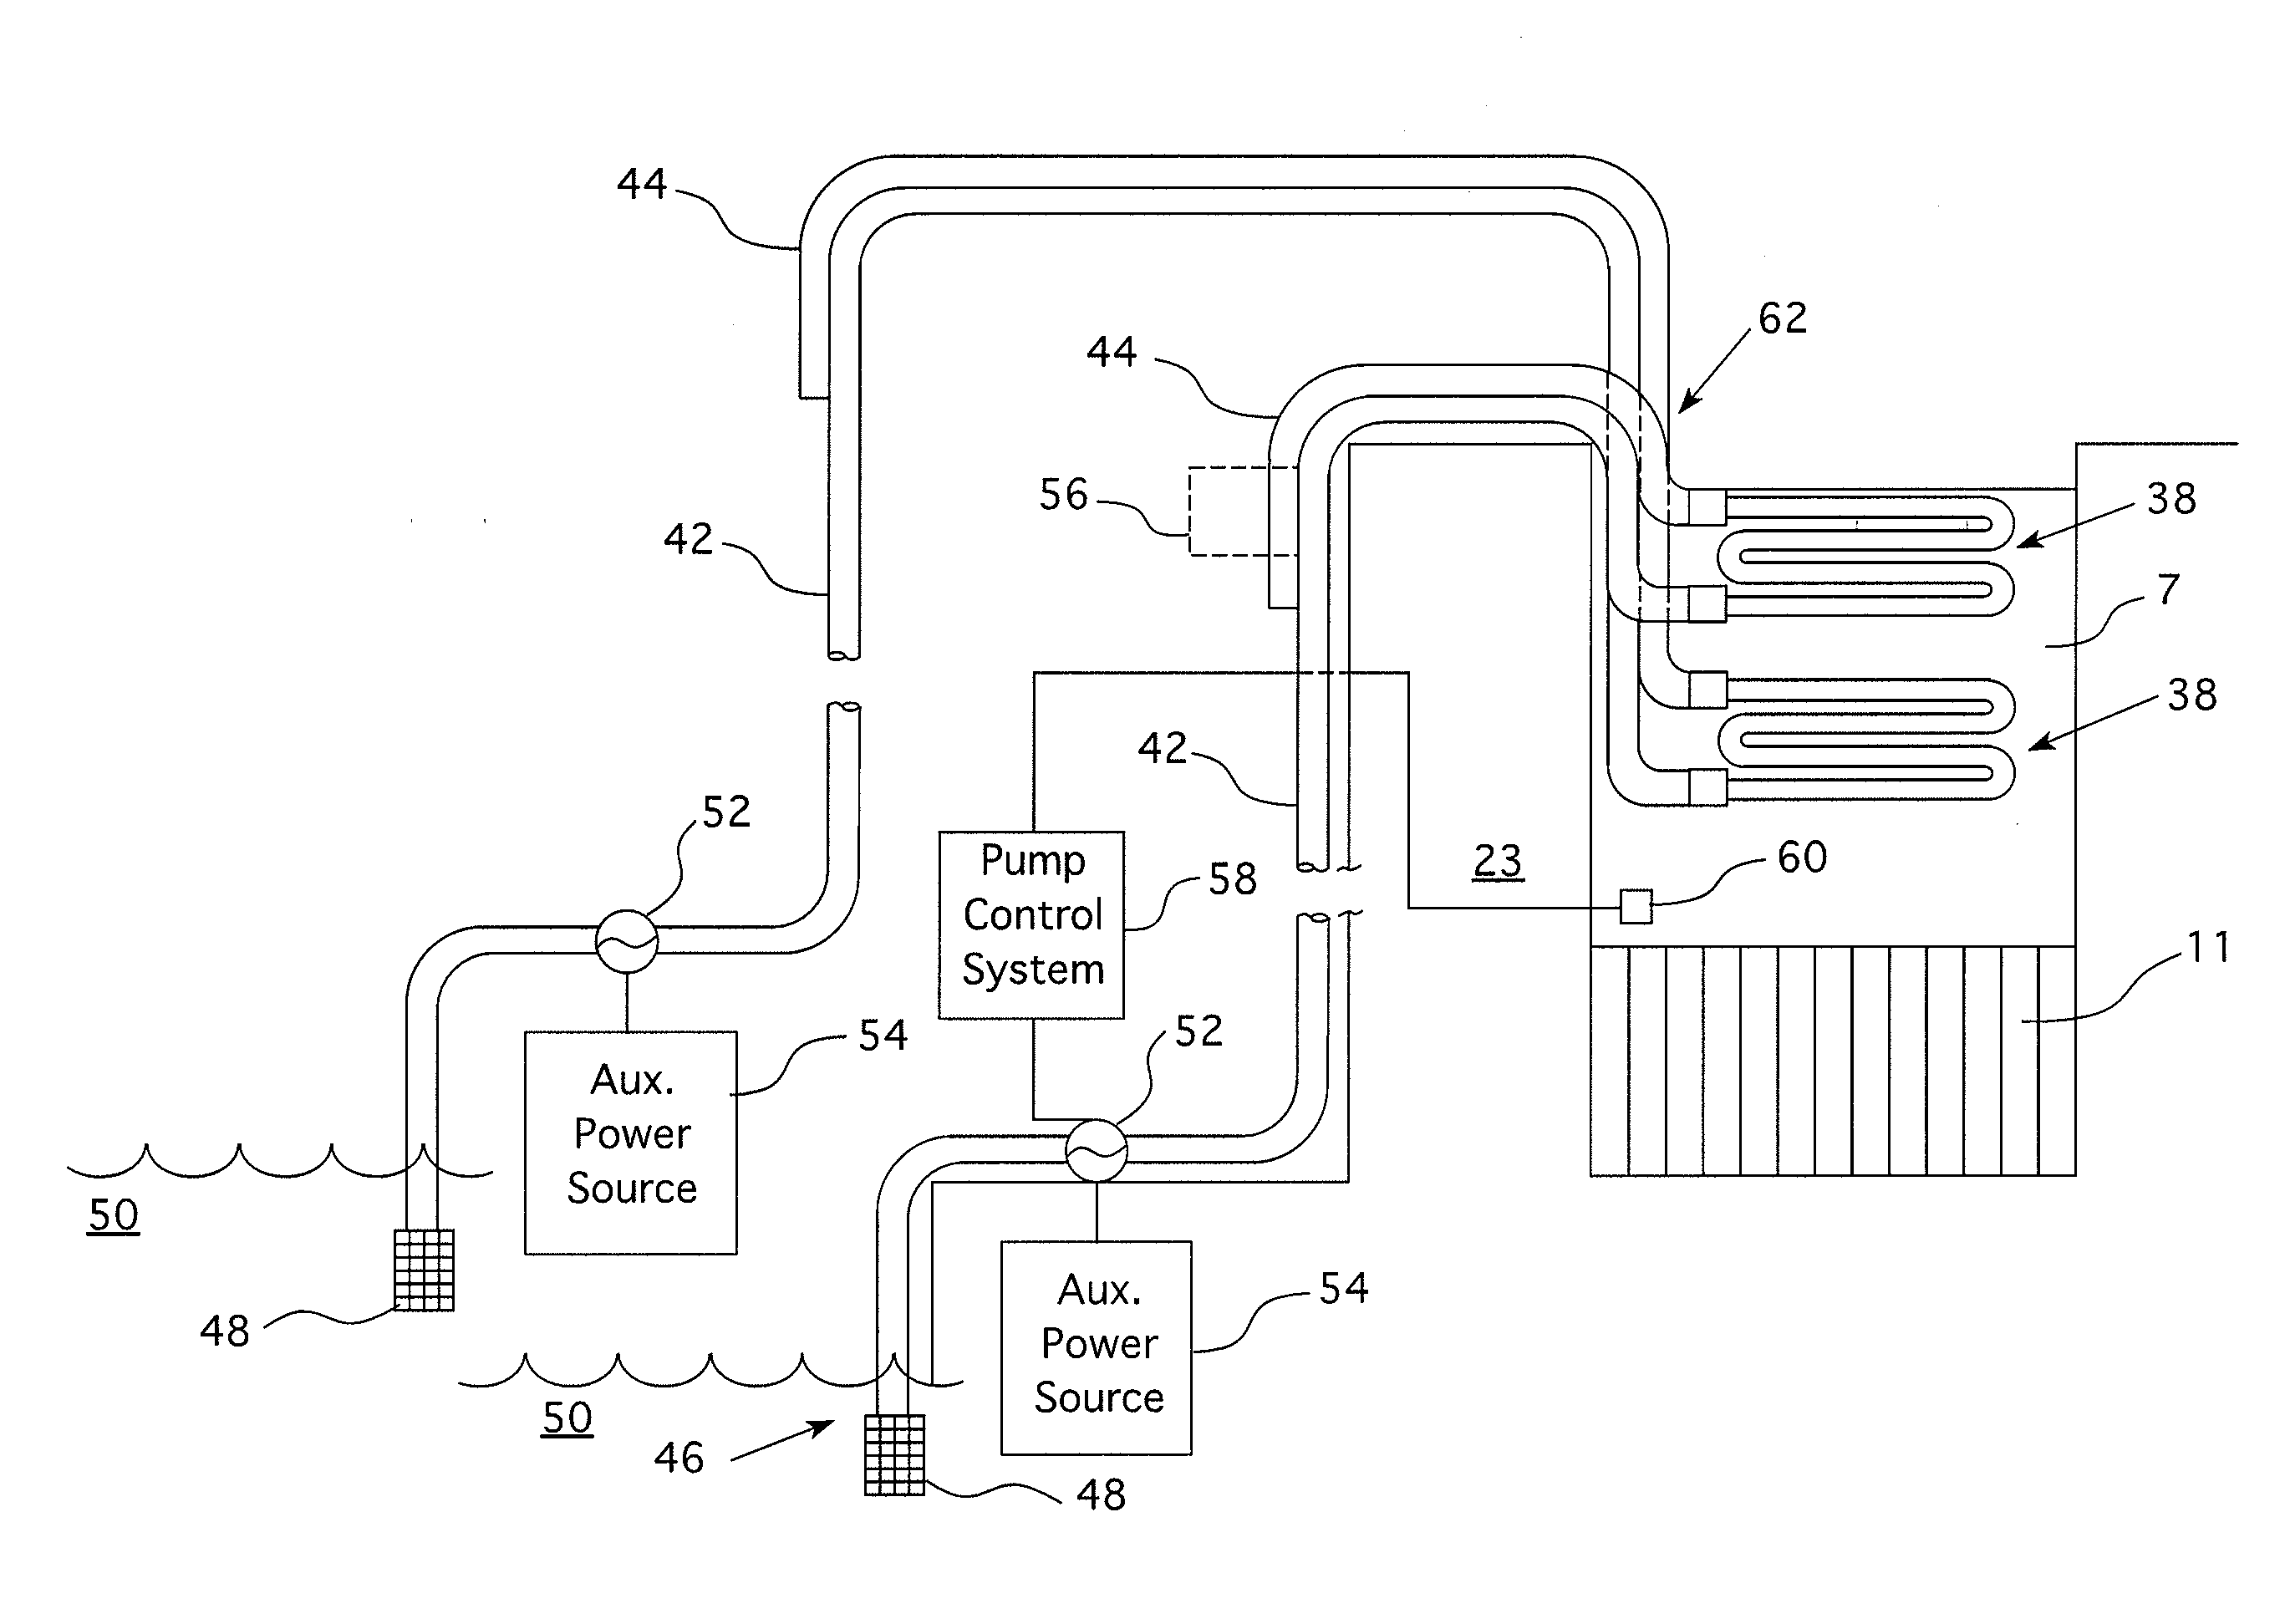 Self-contained emergency spent nuclear fuel pool cooling system